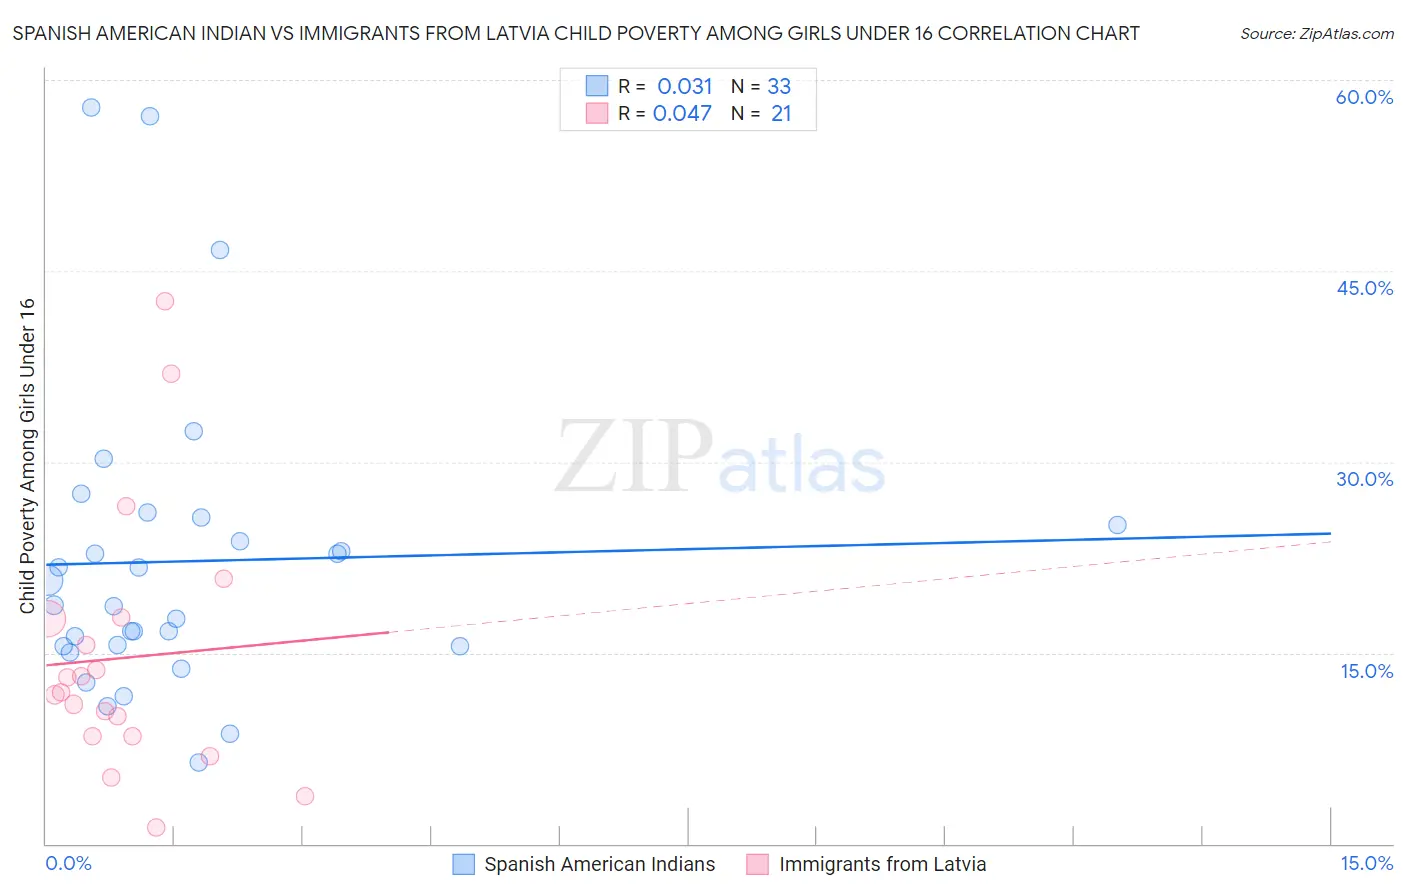 Spanish American Indian vs Immigrants from Latvia Child Poverty Among Girls Under 16